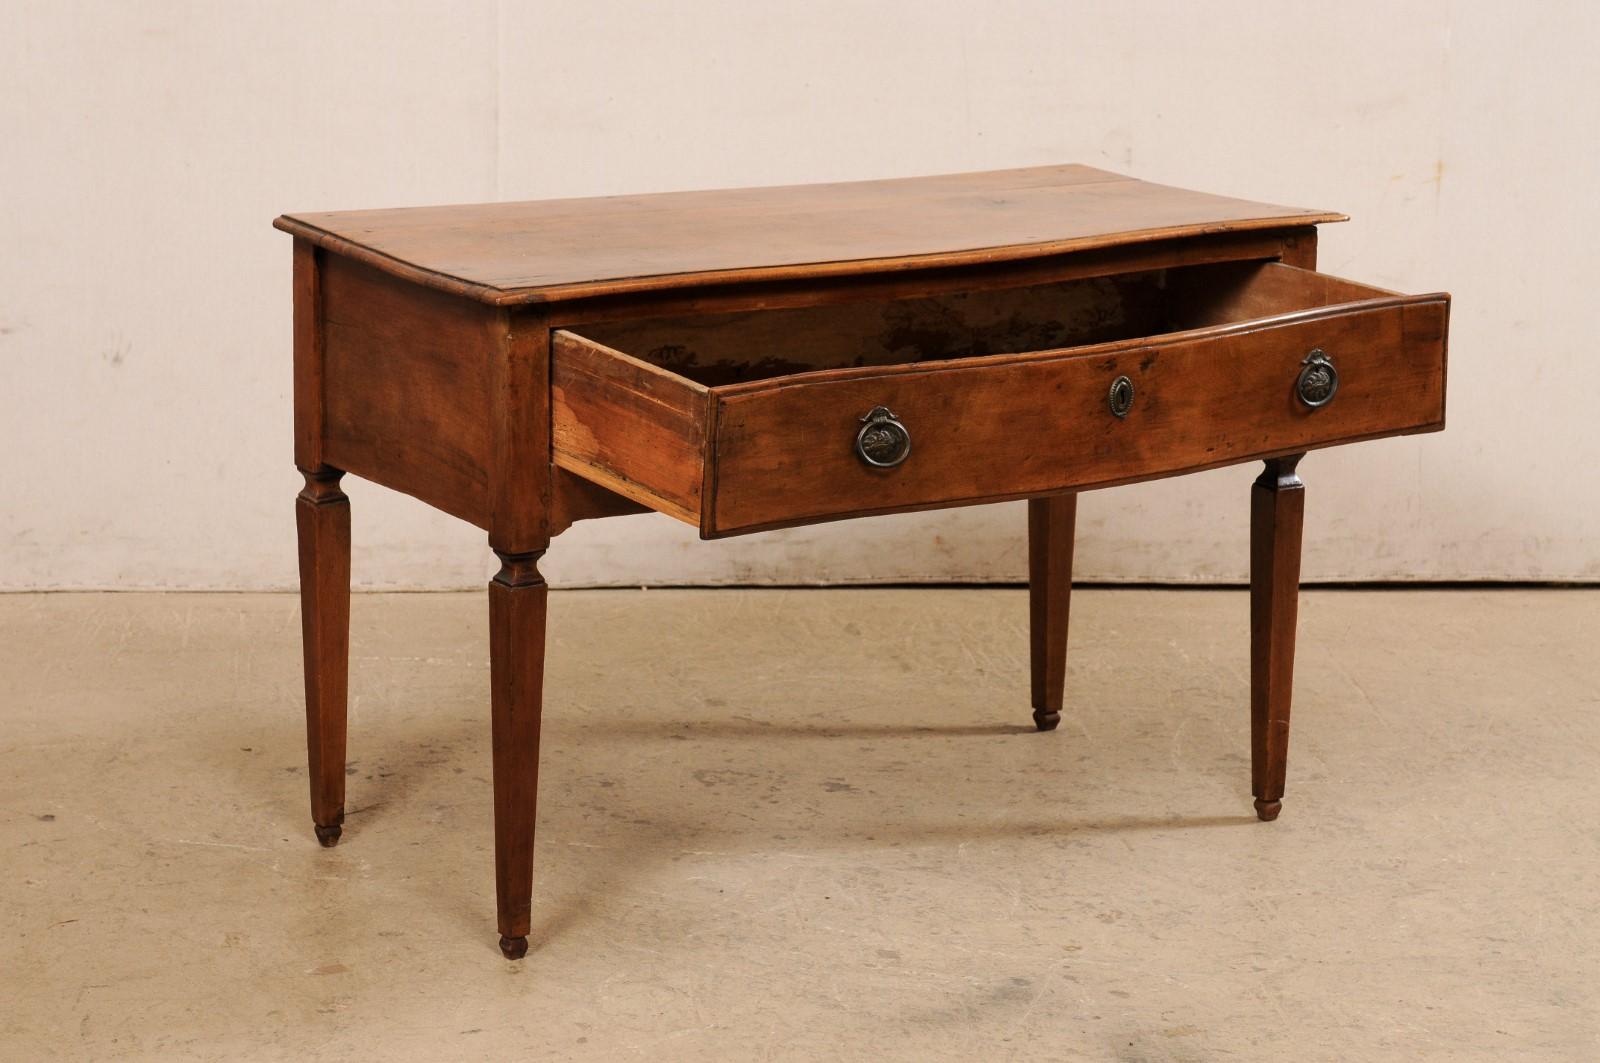 19th Century Late 18th C. Italian Walnut Server Table w/Subtle Bow Front & Long Single Drawer For Sale